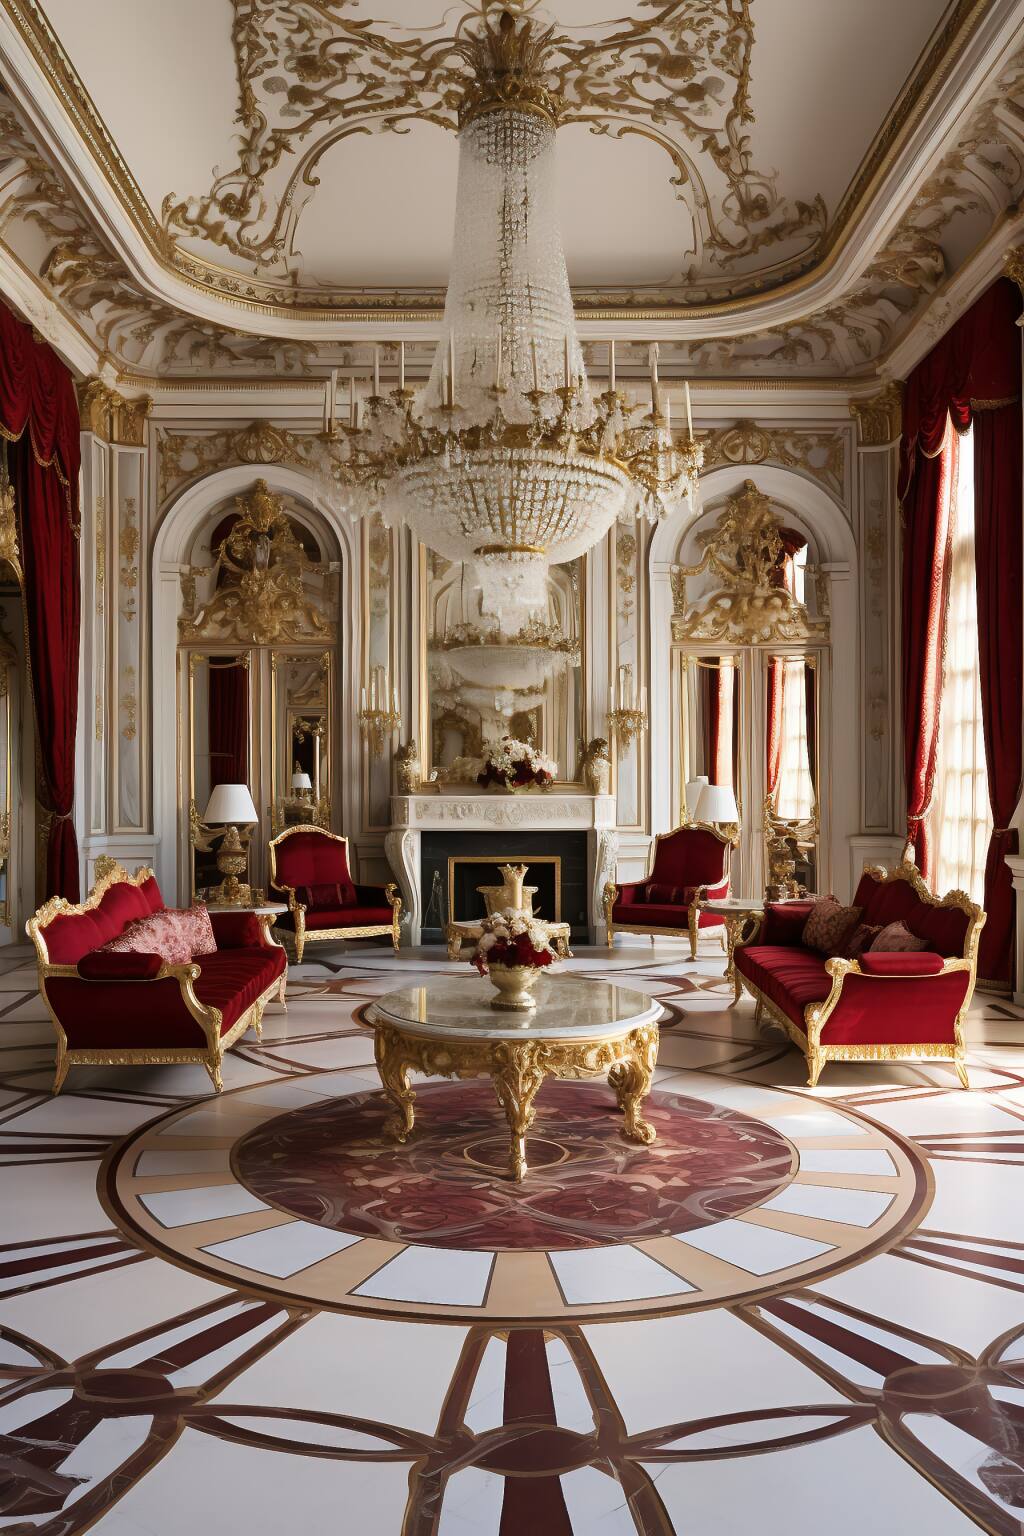 A Regal Living Room Adorned In Burgundy And Gold, With Luxurious Velvet Seating And A Lustrous Marble Floor That Exudes Opulence.